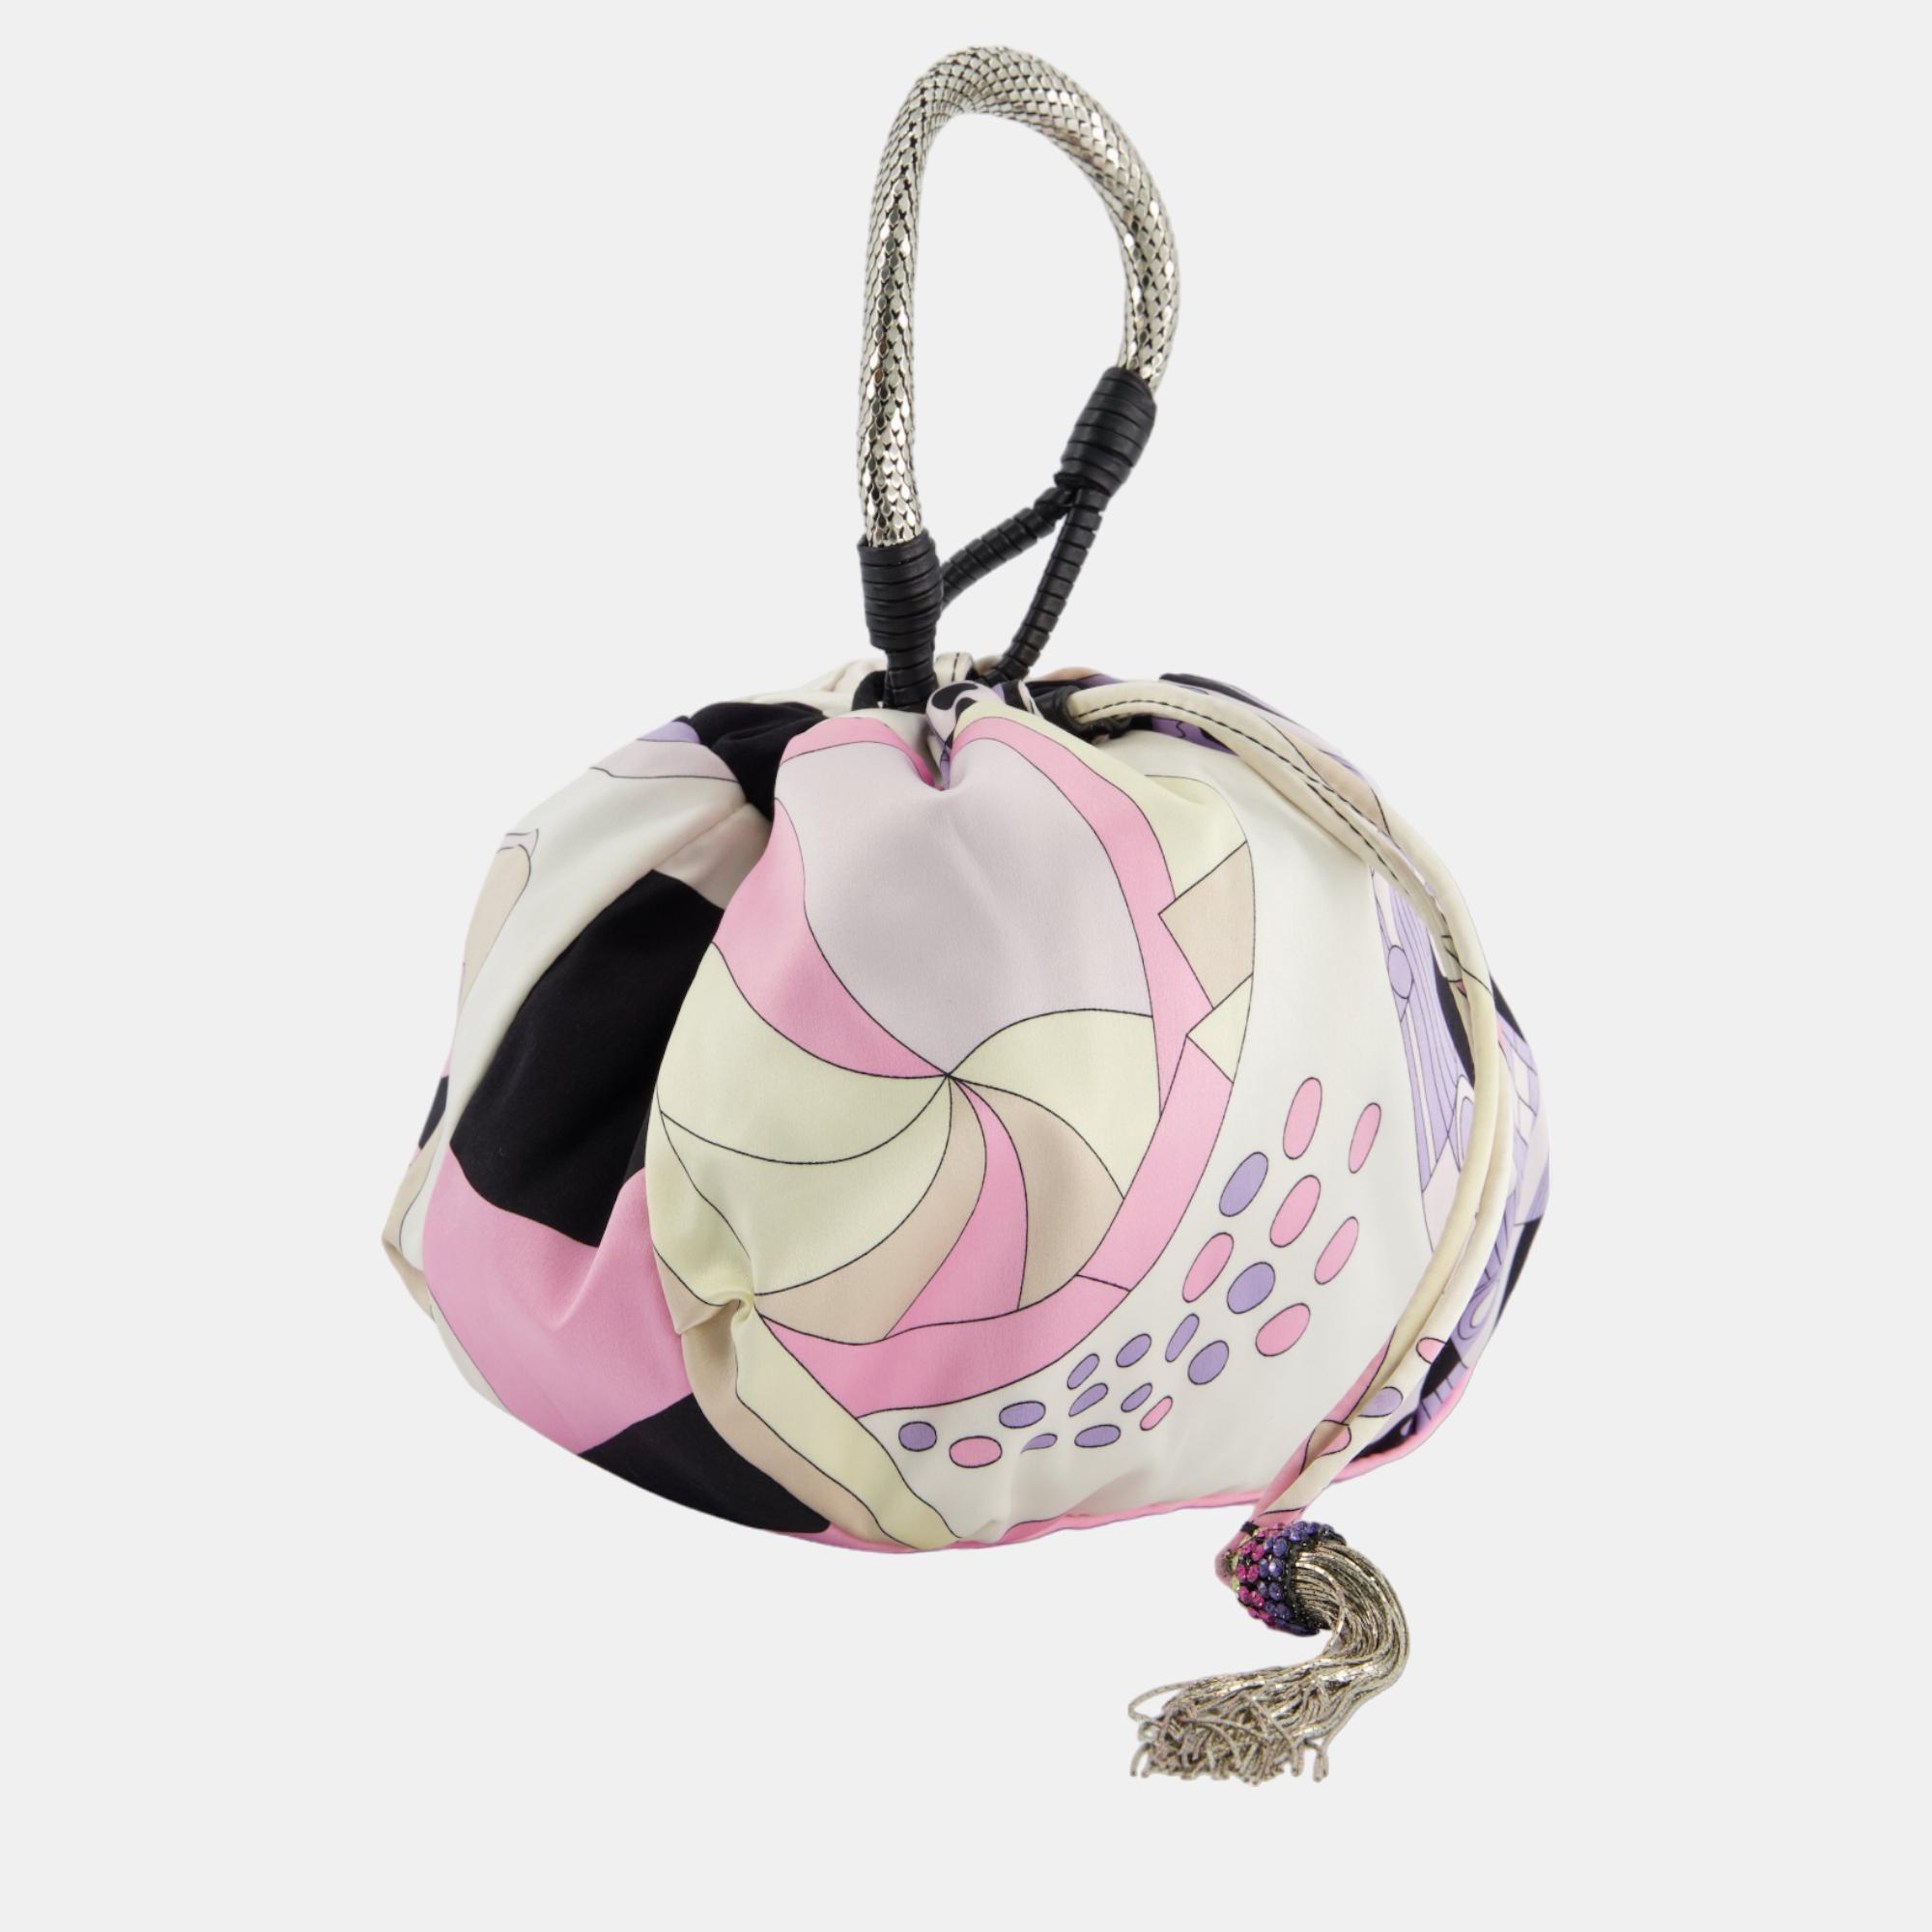 Emilio Pucci Pink Satin Pouch Tassel Bag With Chain Mail Leather Handle Detail